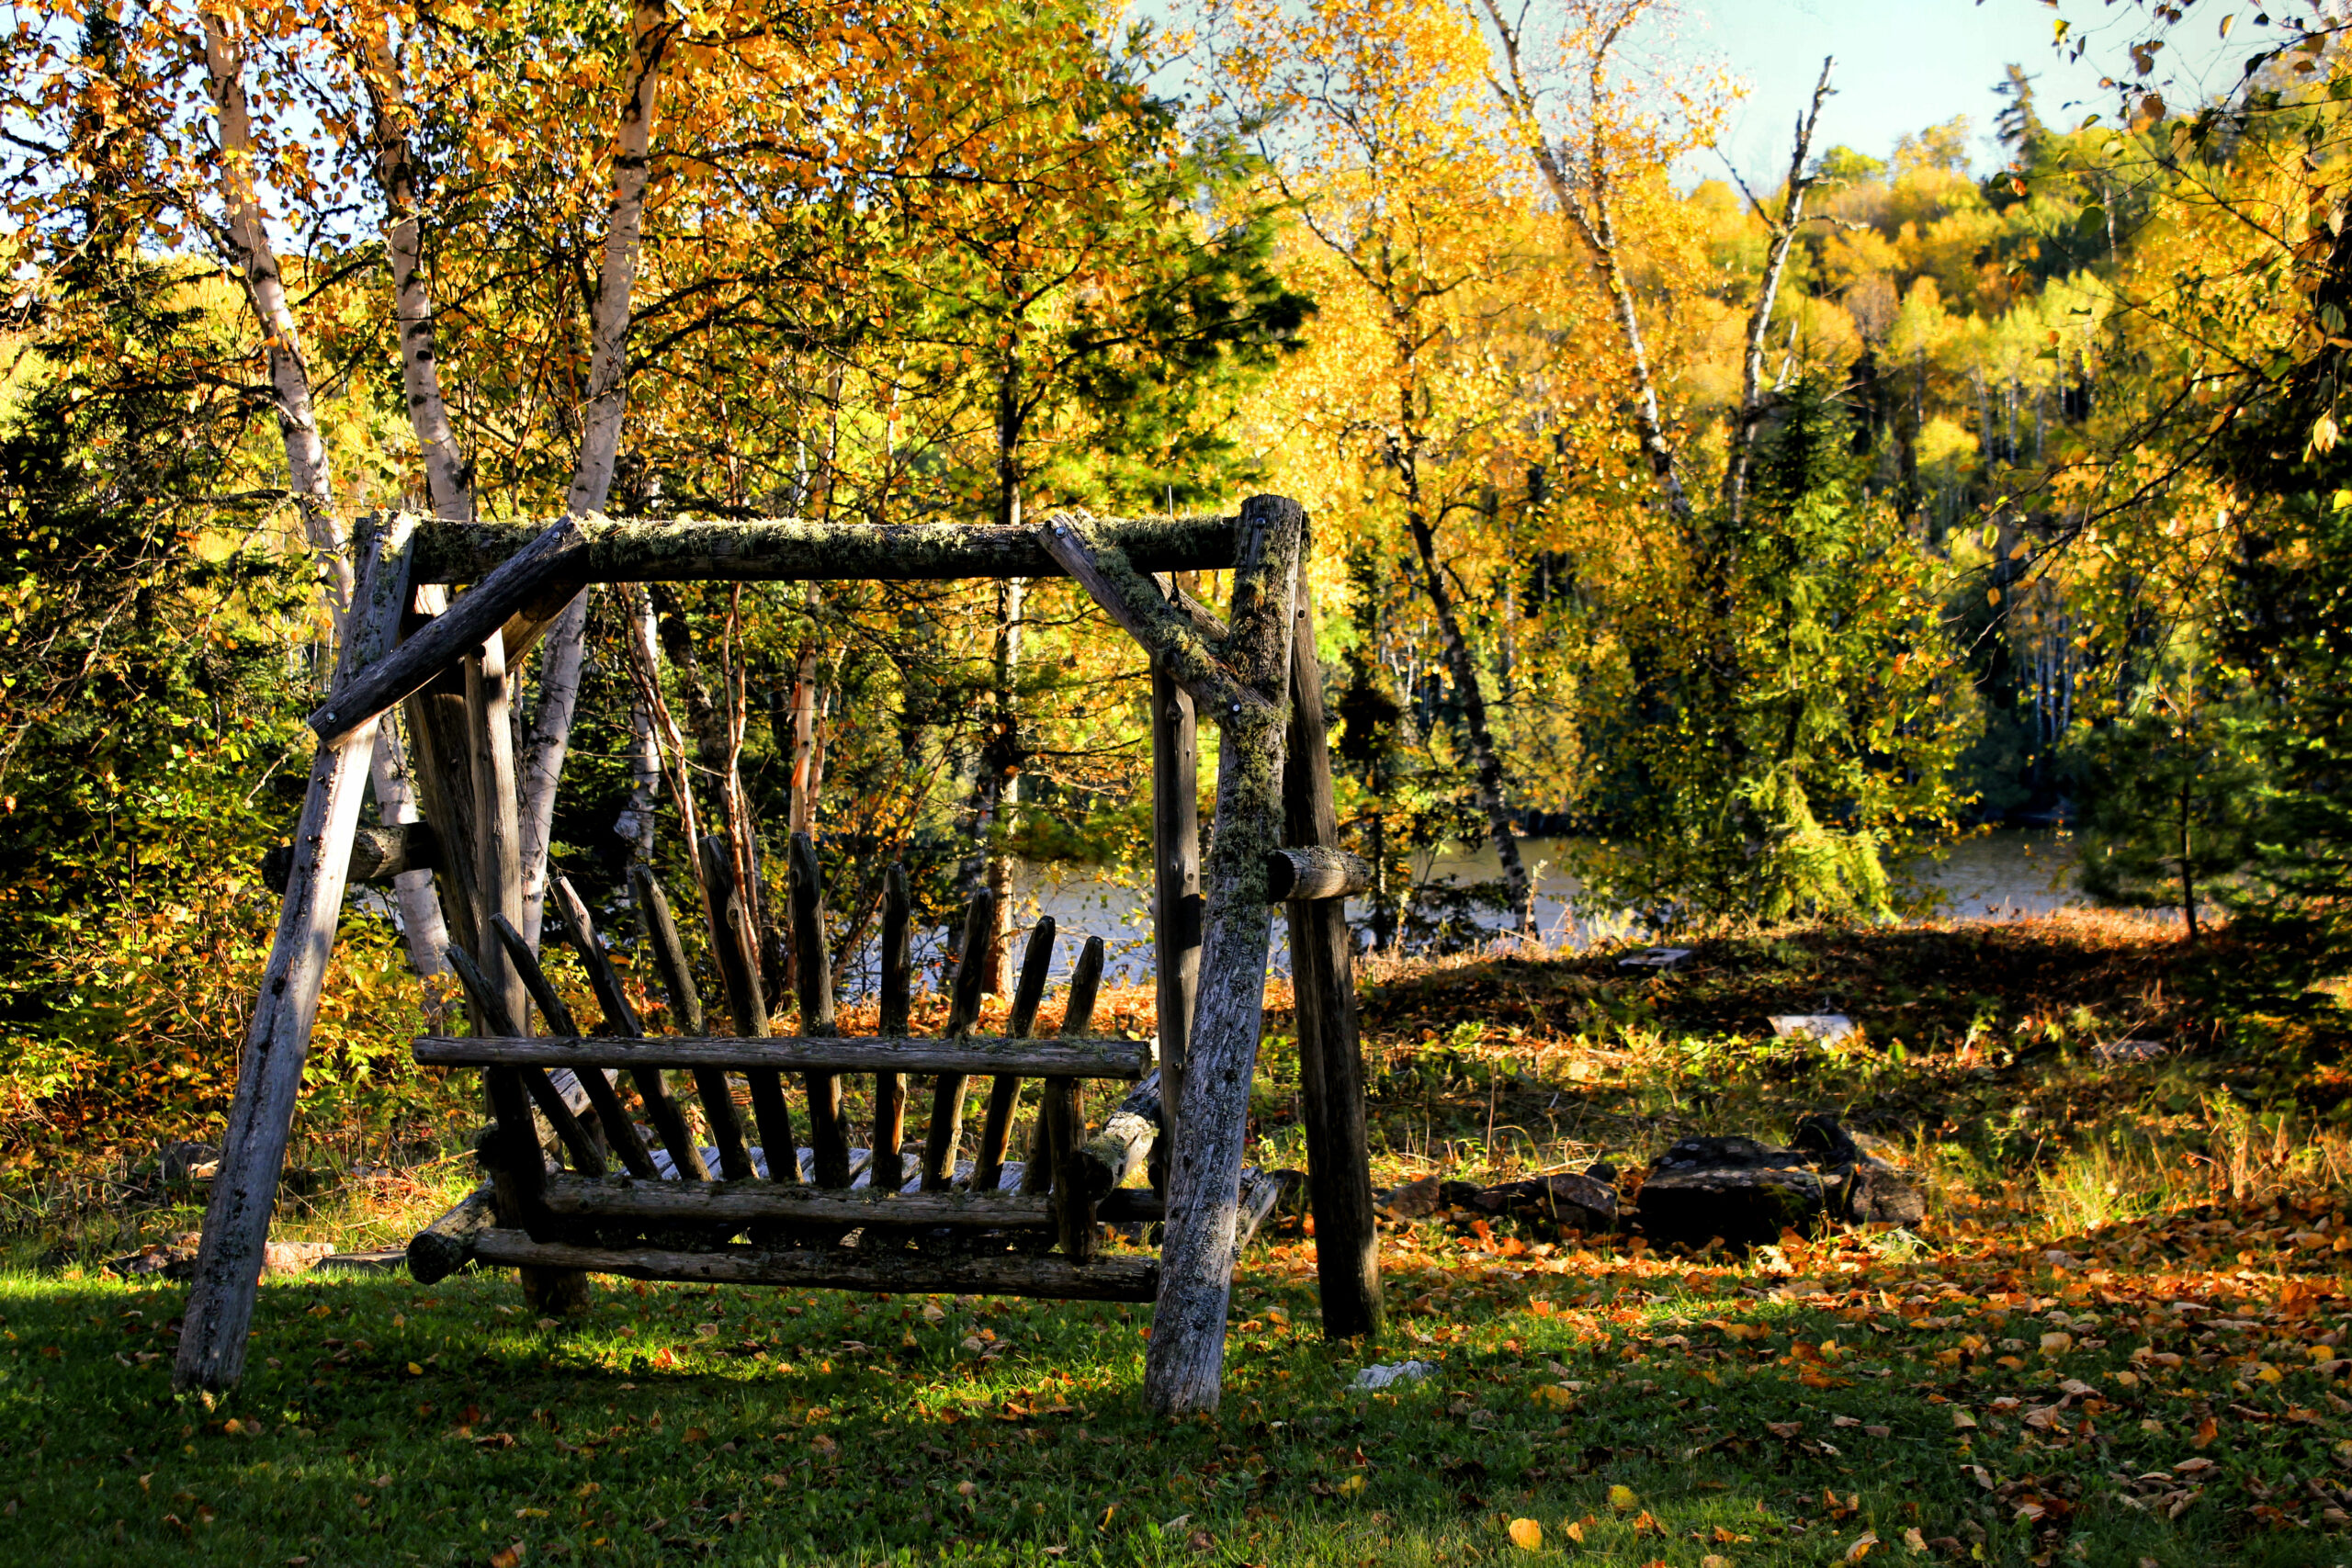 Shot from behind of bench swing in the fall